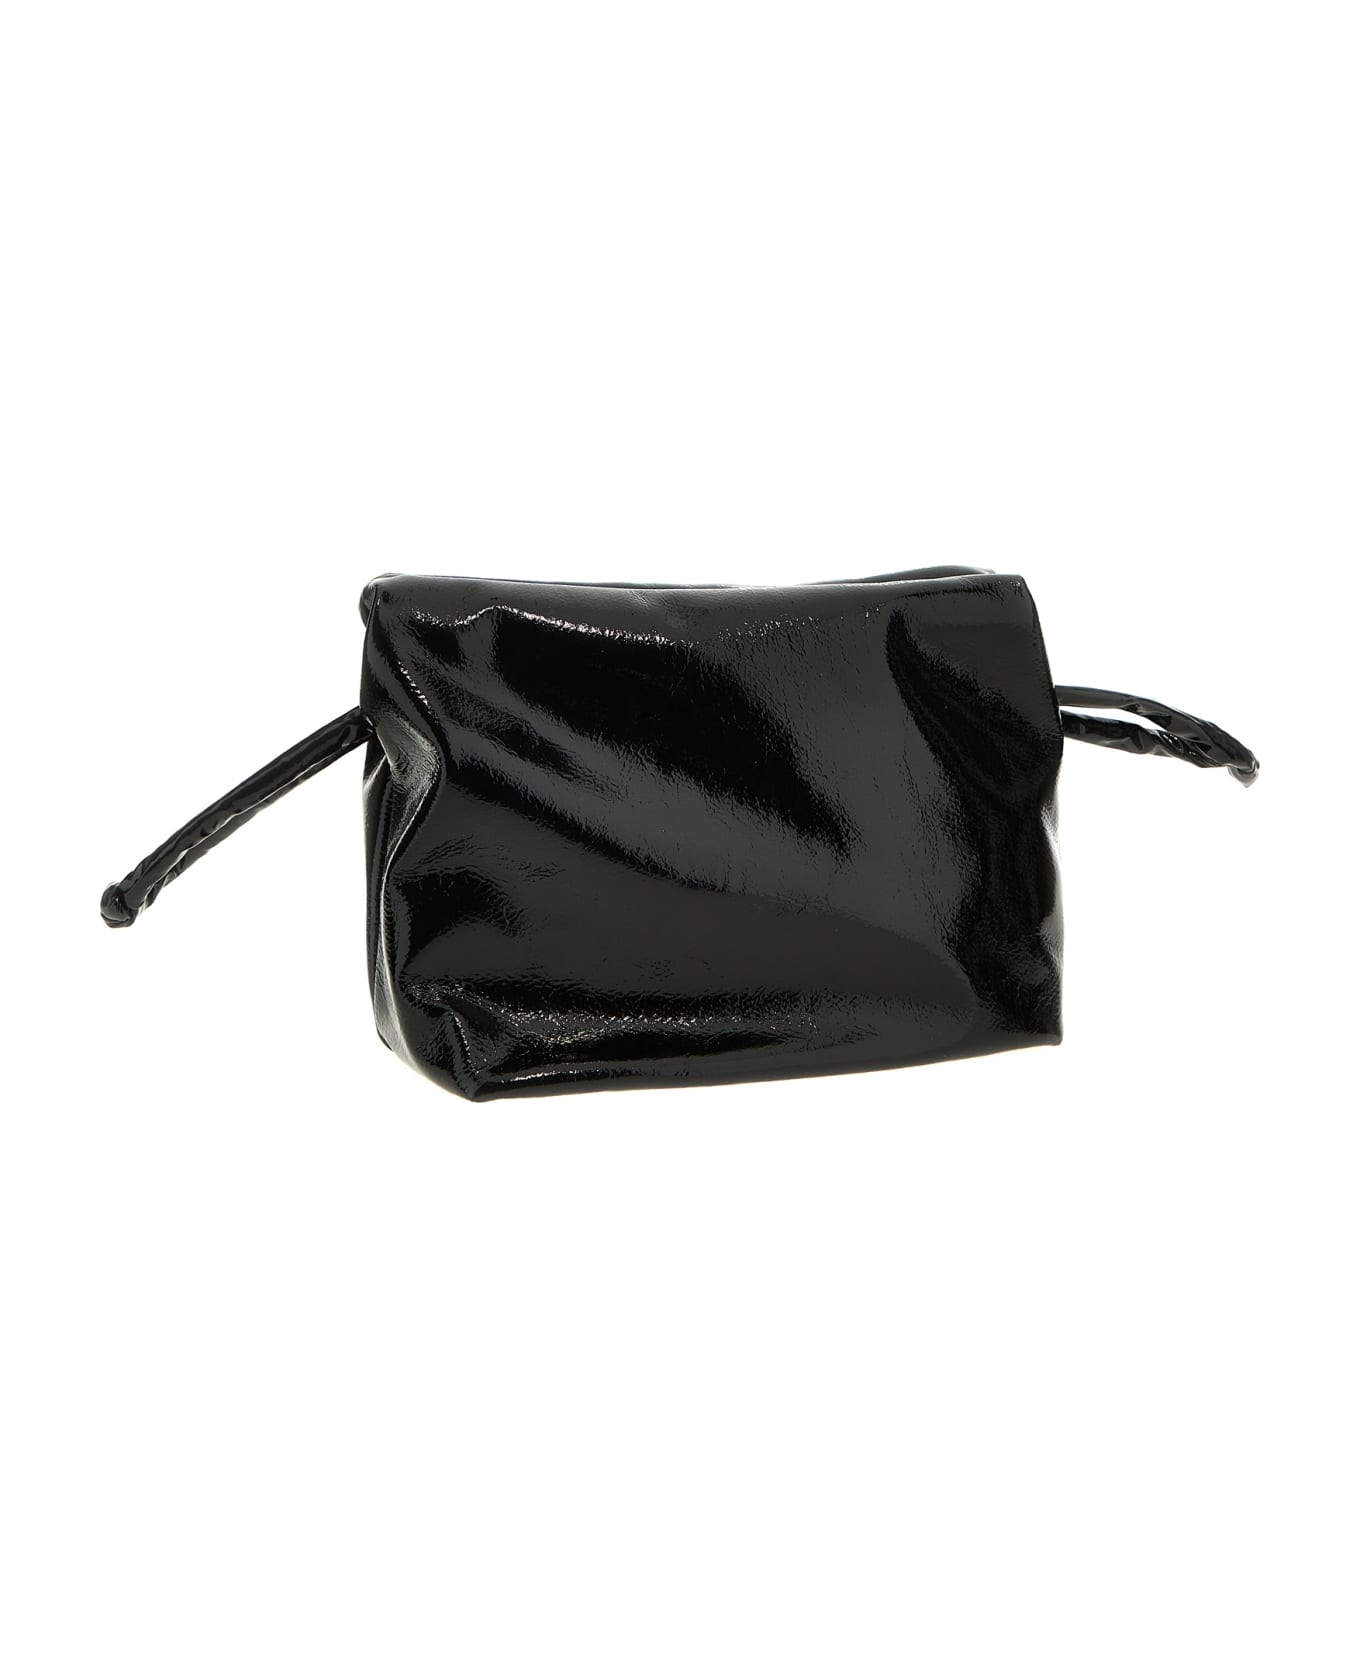 KASSL Editions 'lacquer' Clutch - Black  